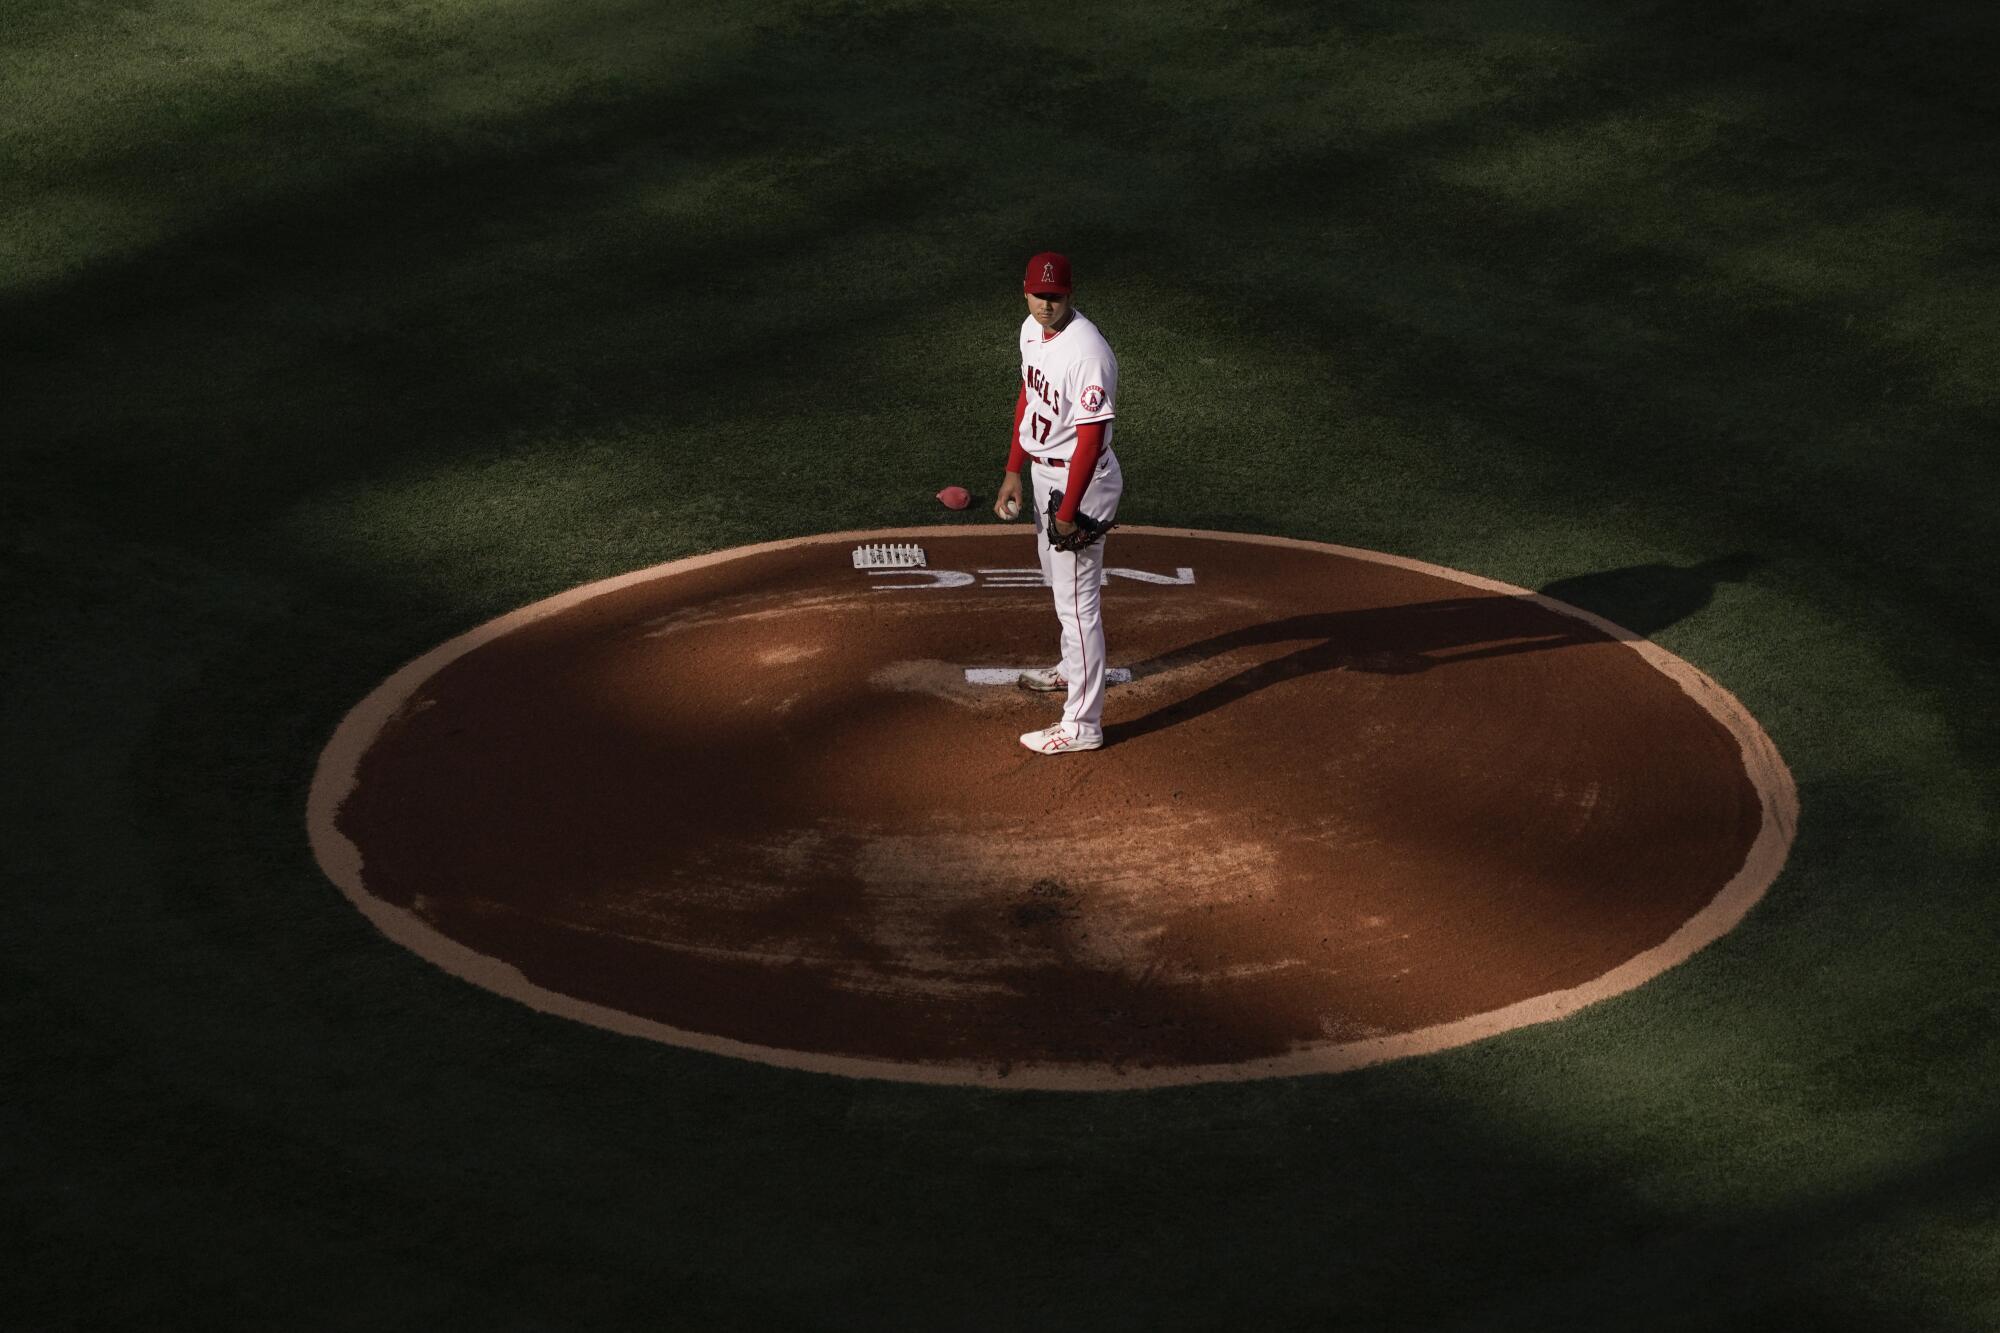 Angels starting pitcher Shohei Ohtani stands on the mound against the Cleveland Indians on May 19.